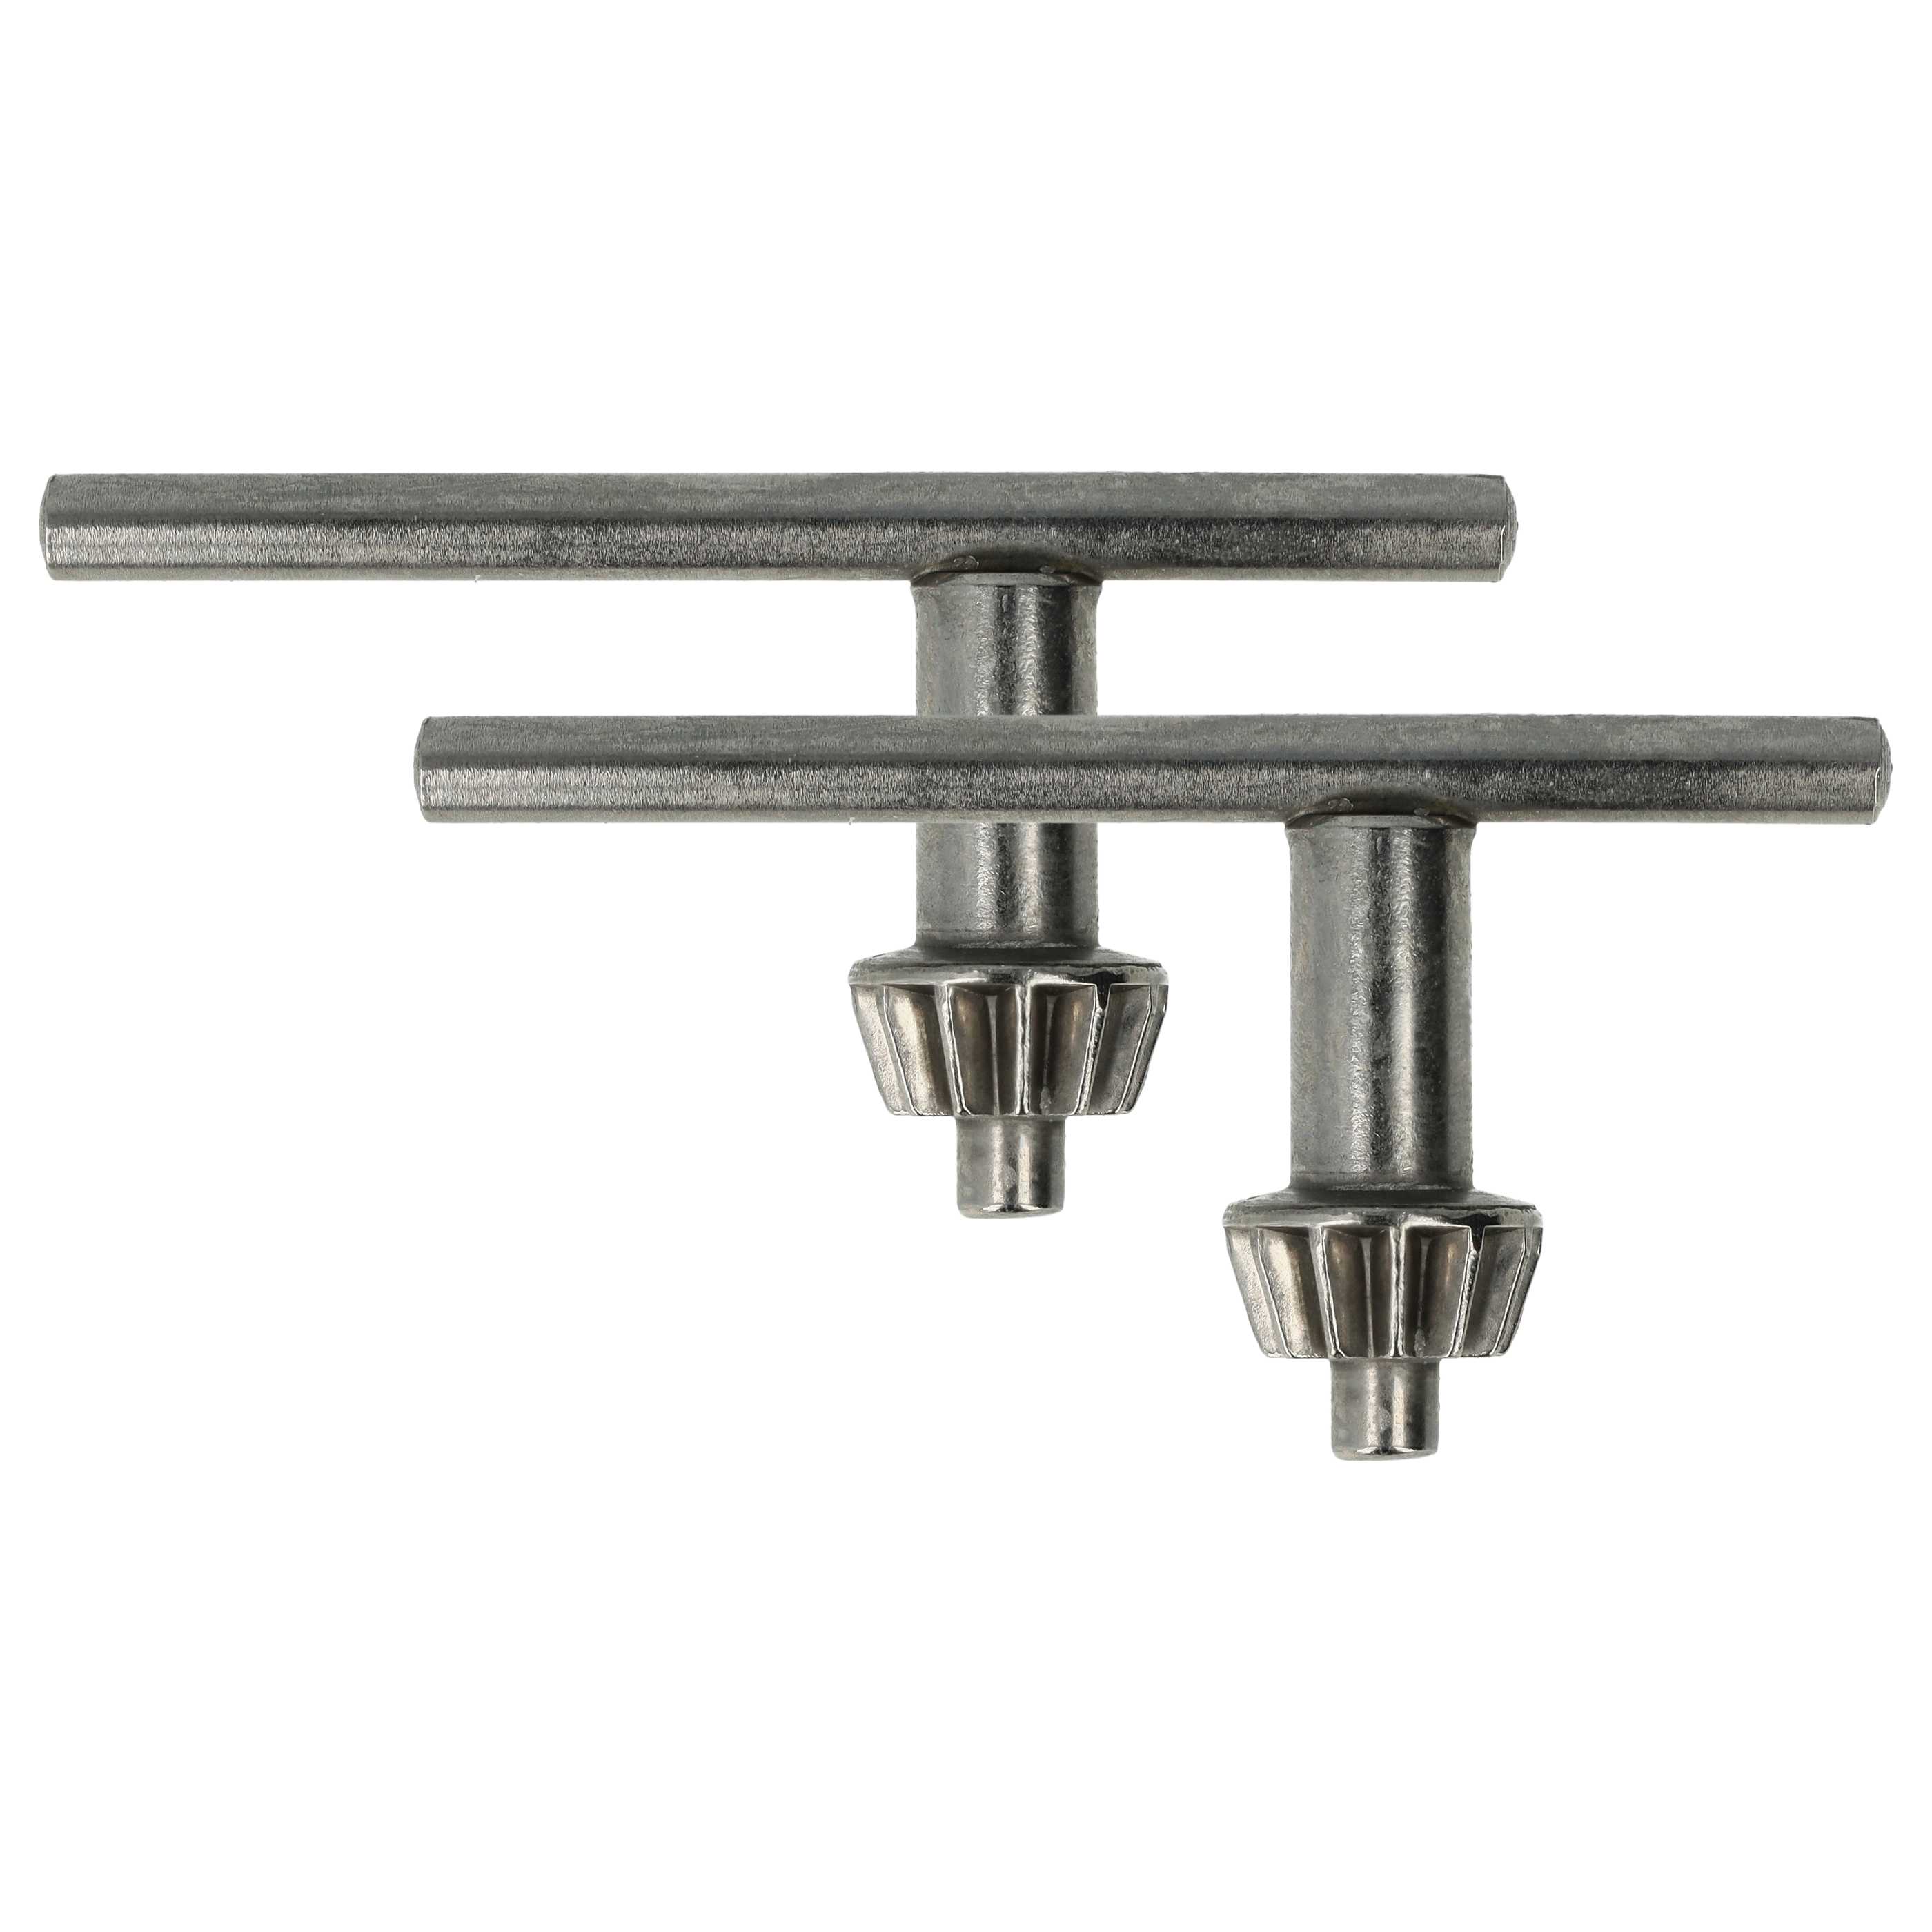 2x Chiave mandrino trapano S2A 10-13mm sostituisce Wolfcraft 2630000 per trapano Bosch, Metabo